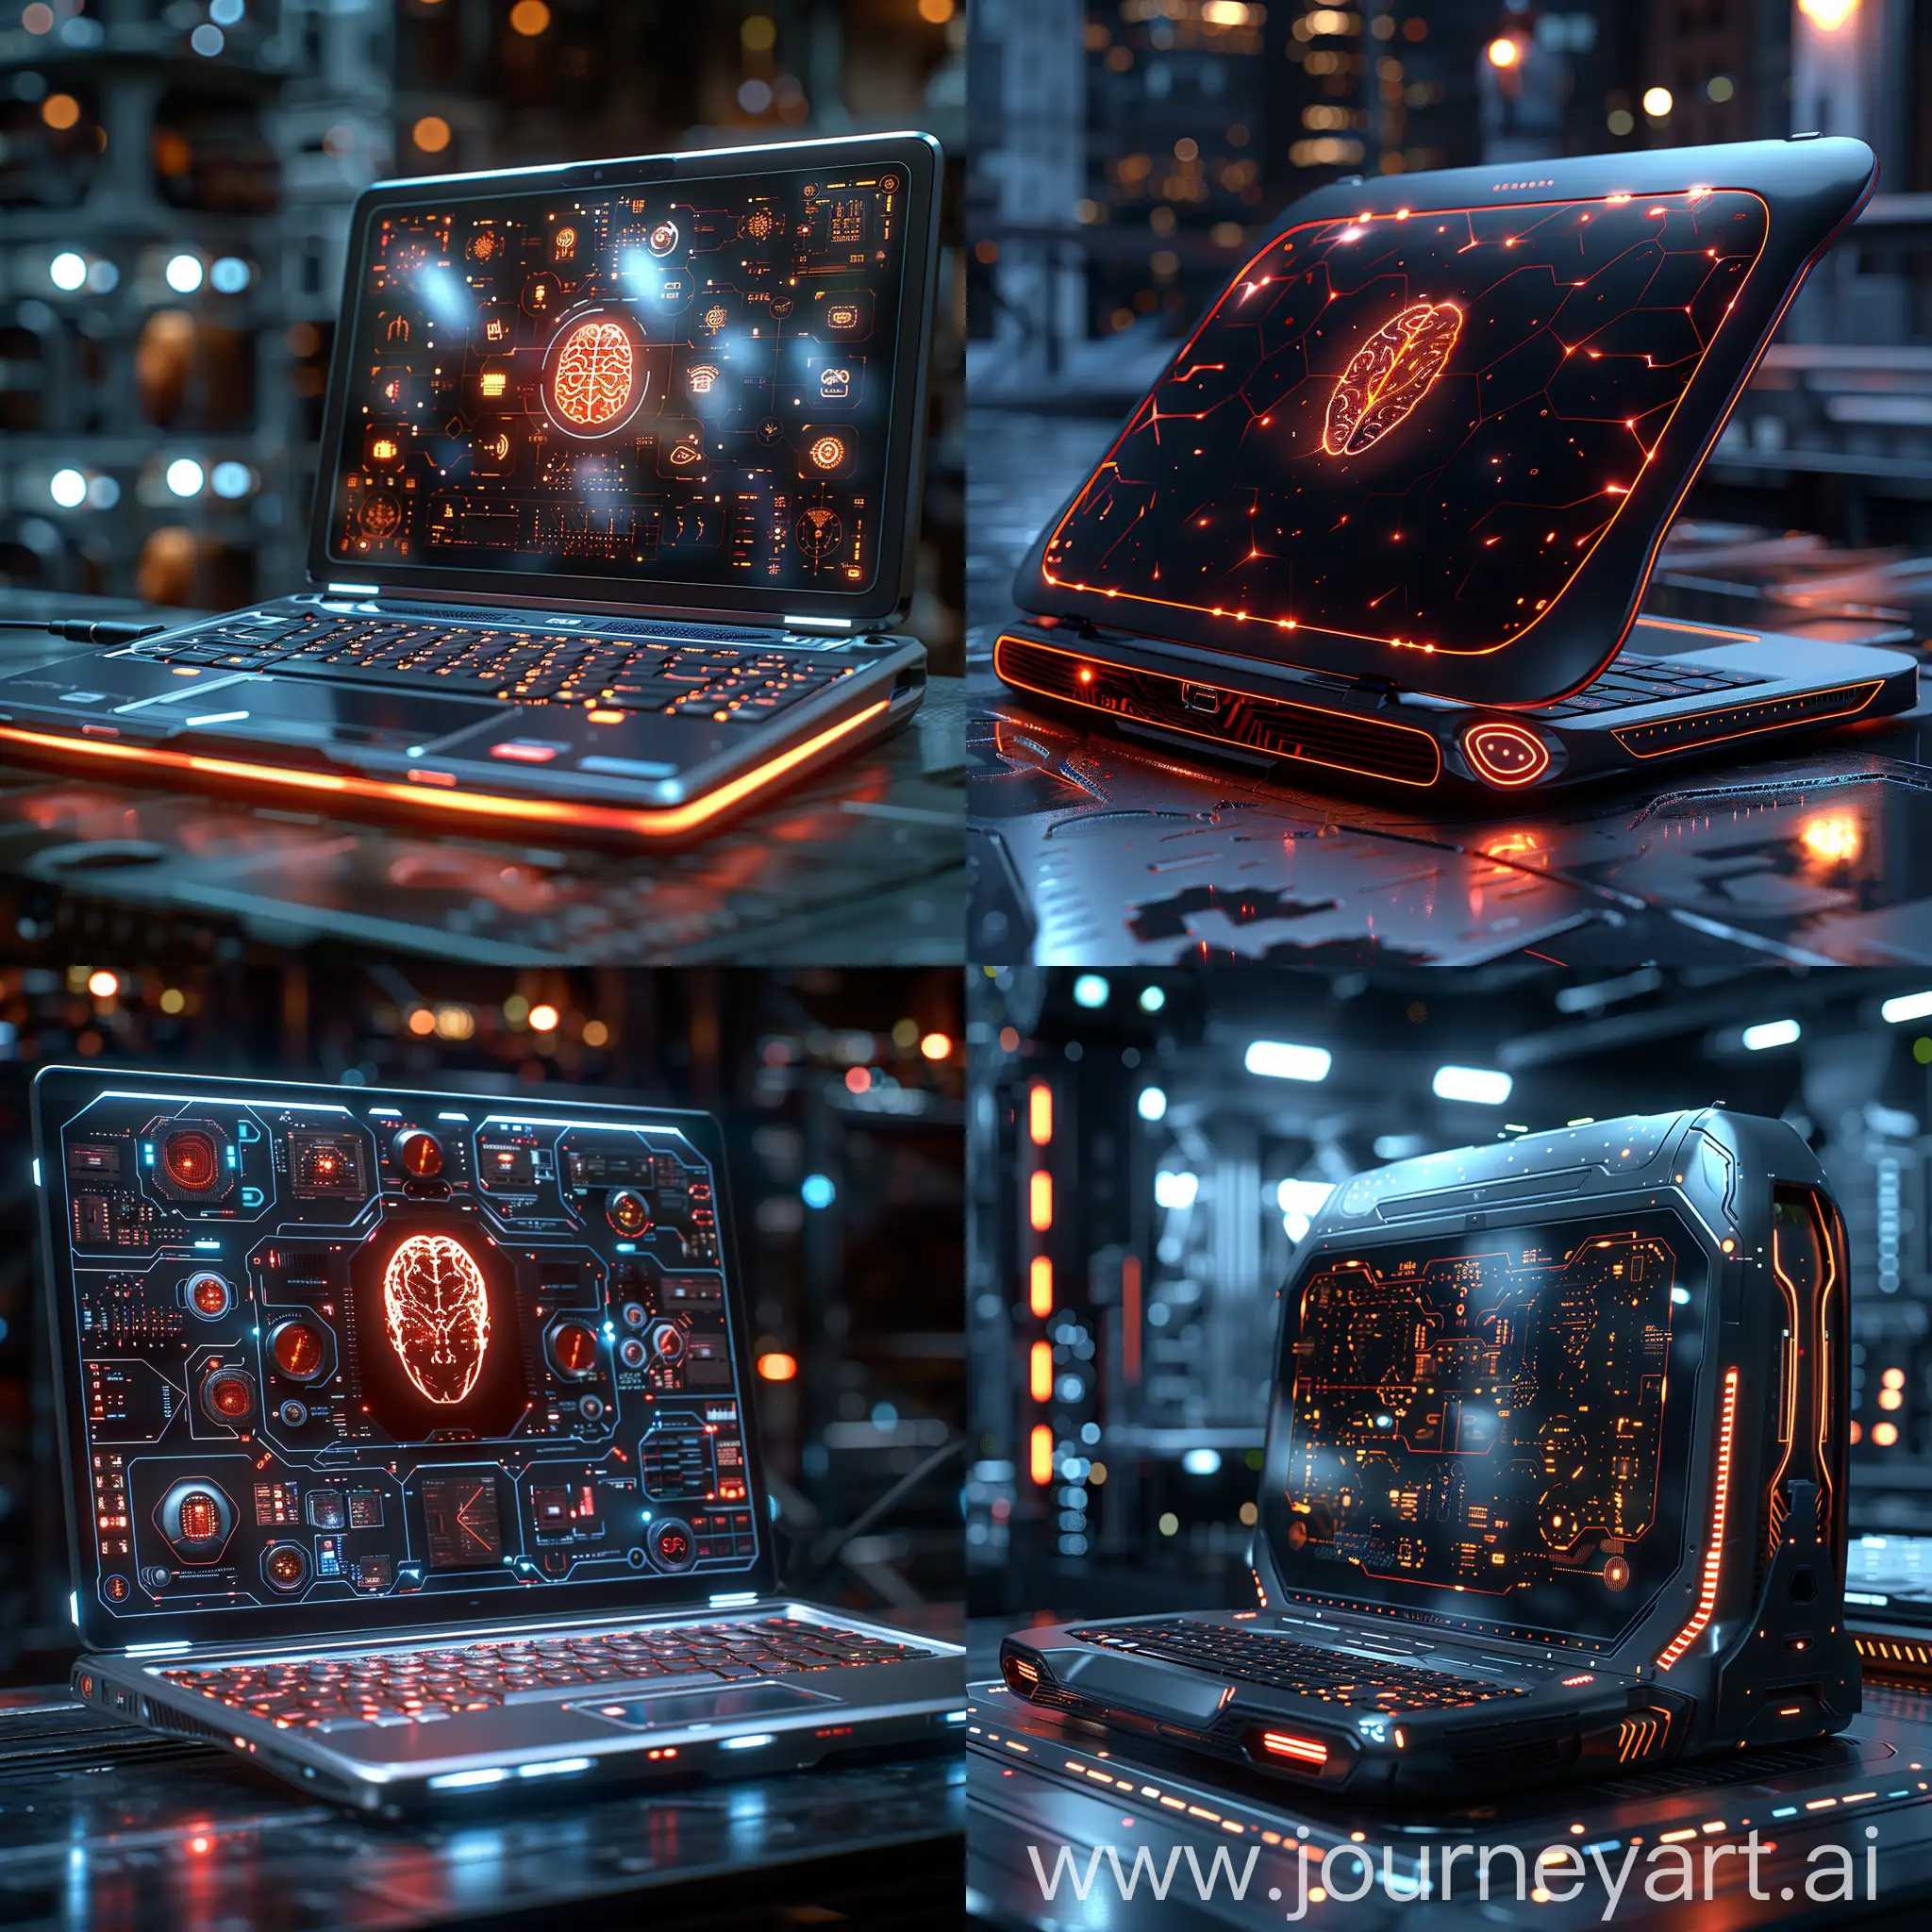 Futuristic laptop, morphing marvels, holographics interfaces, brain-computer interfaces, AI assistants on steroids, enhanced reality integration, self-powered and sustainable, ultra-fast connectivity, security with a thought, octane render --stylize 1000